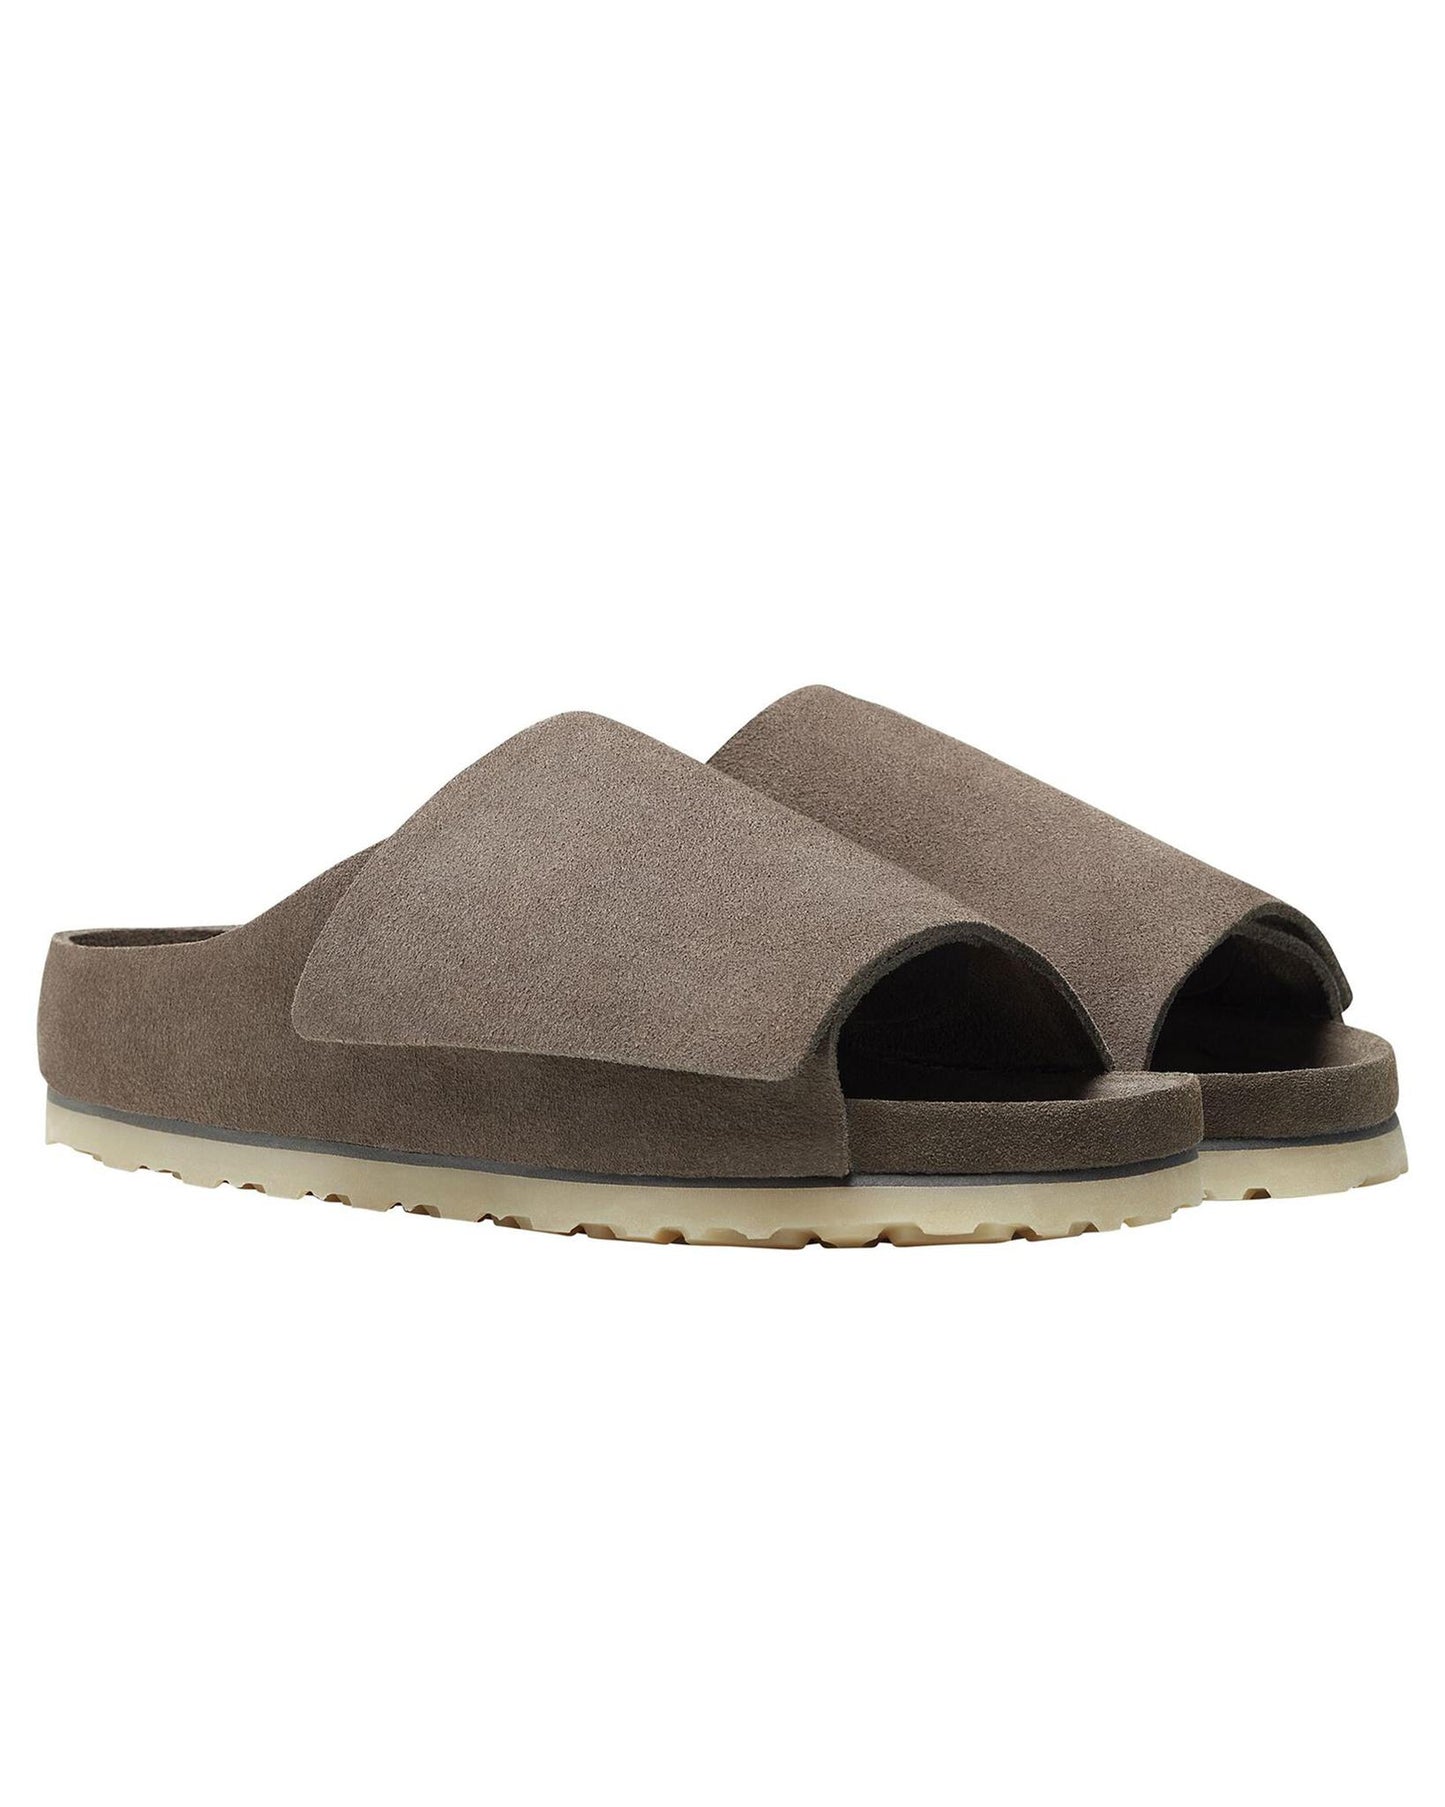 From Dior to Fear of God, Birkenstock's latest drops continue to tickle  fashionable fancies without sacrificing orthopaedic support - CNA Luxury